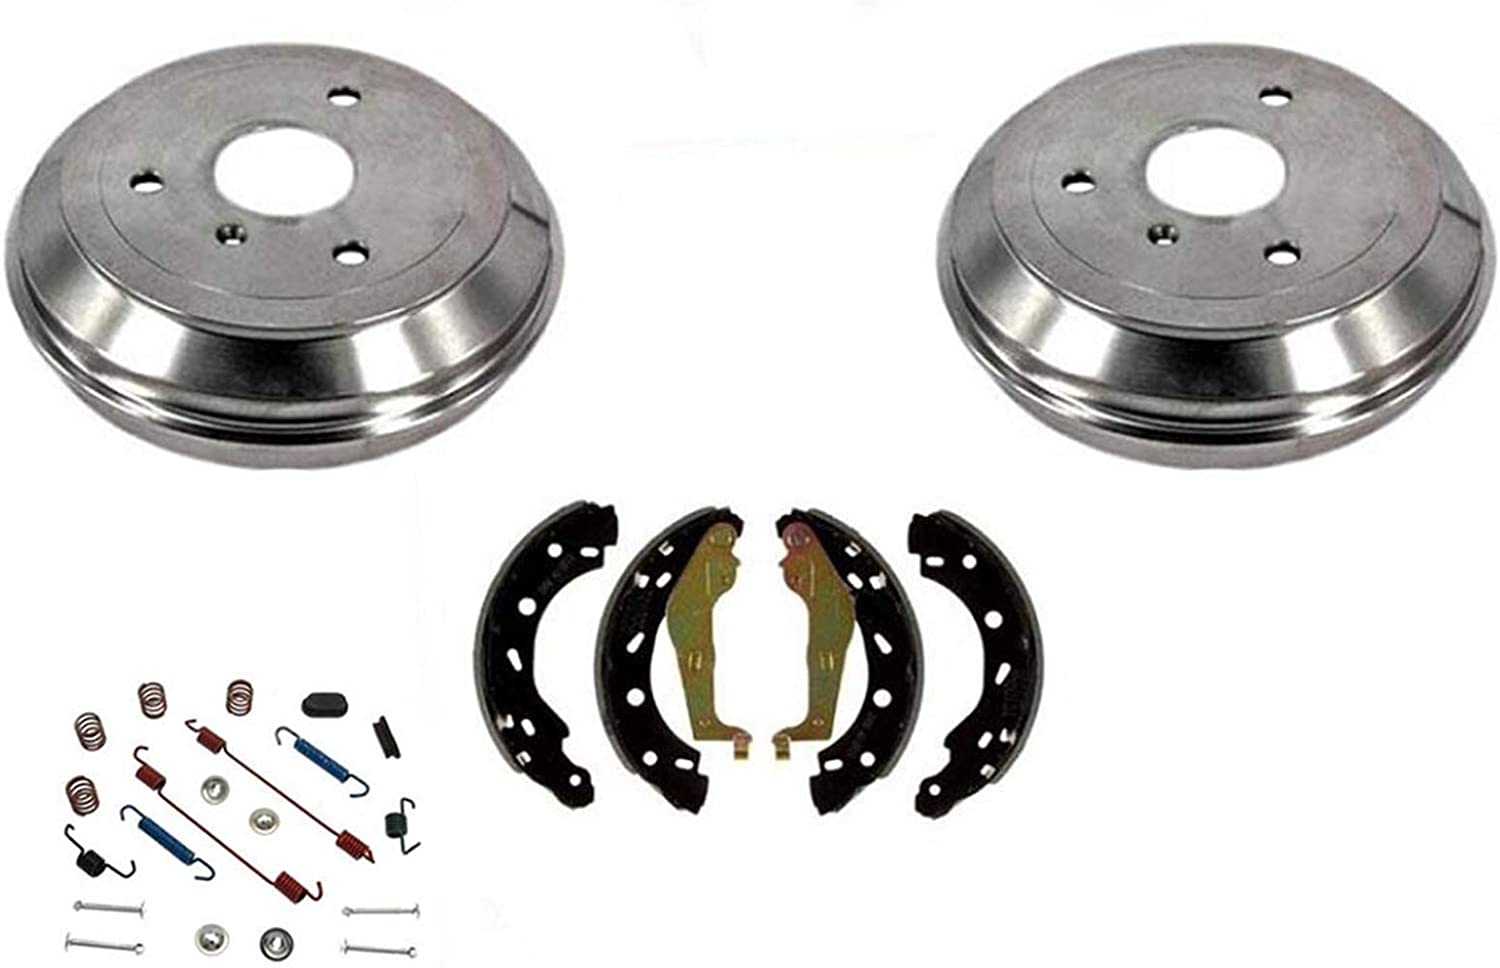 for 05-15 Smart Car Fortwo 100% New Rear Brake Drums & Rear Brake Shoes 4pc Kit